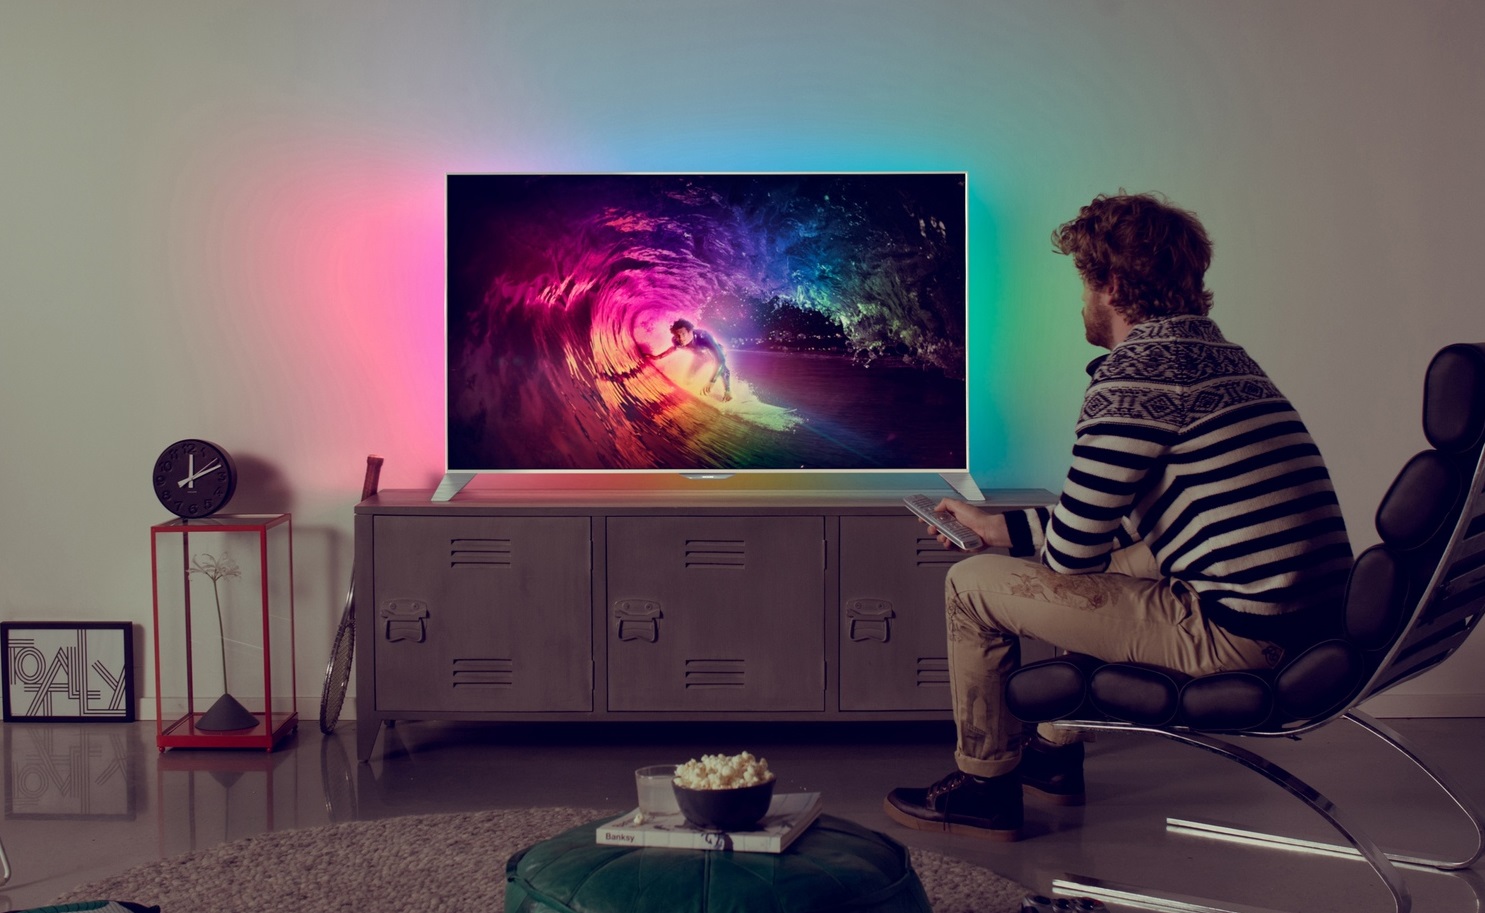 Ranking of the best smart TVs for 2020